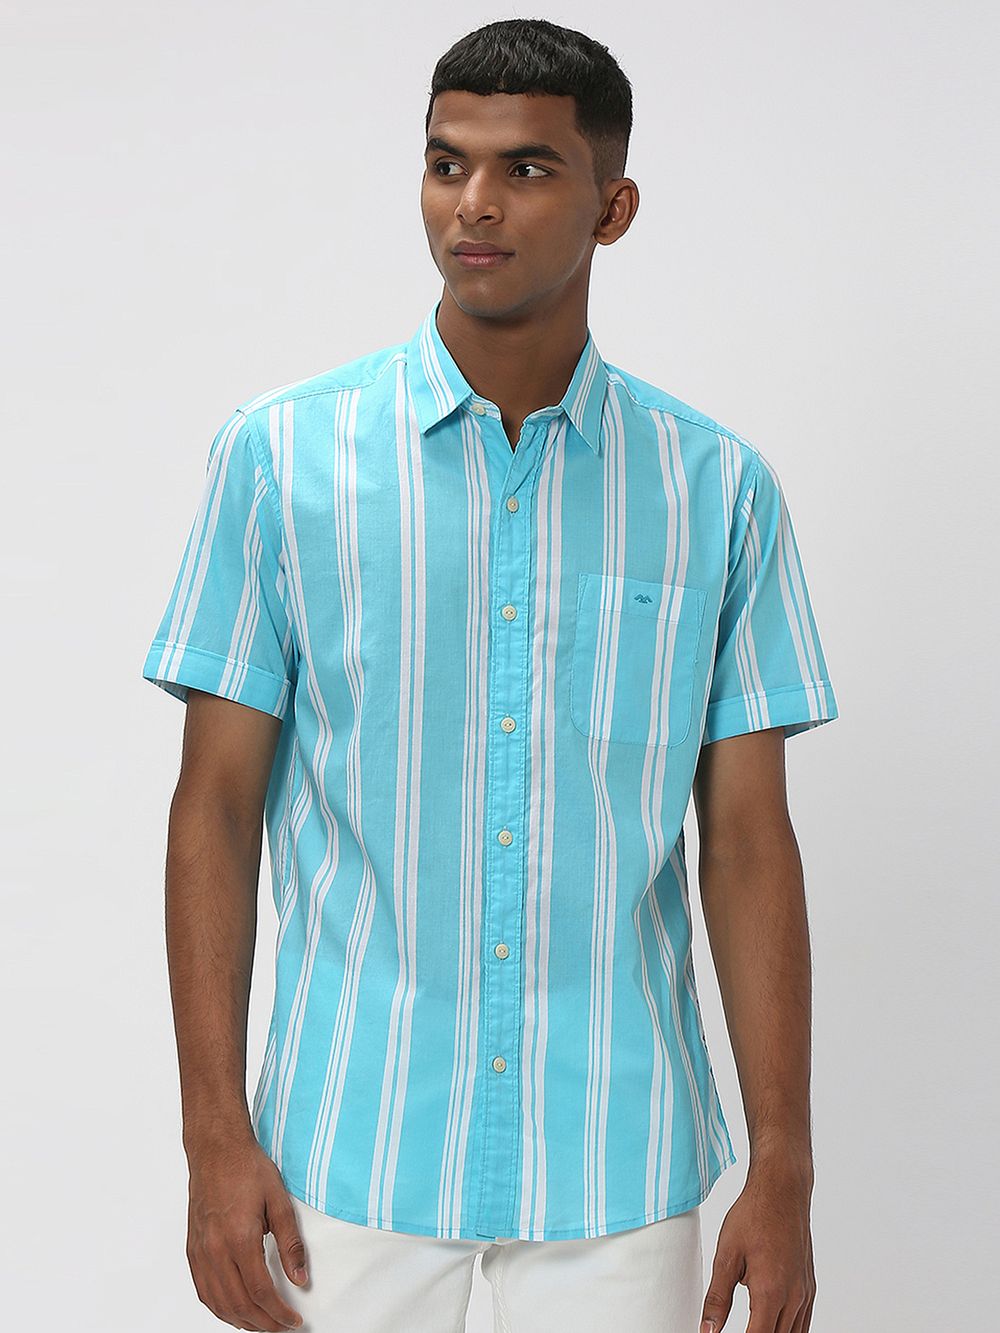 Turquoise & White Stripe Slim Fit Casual Shirt